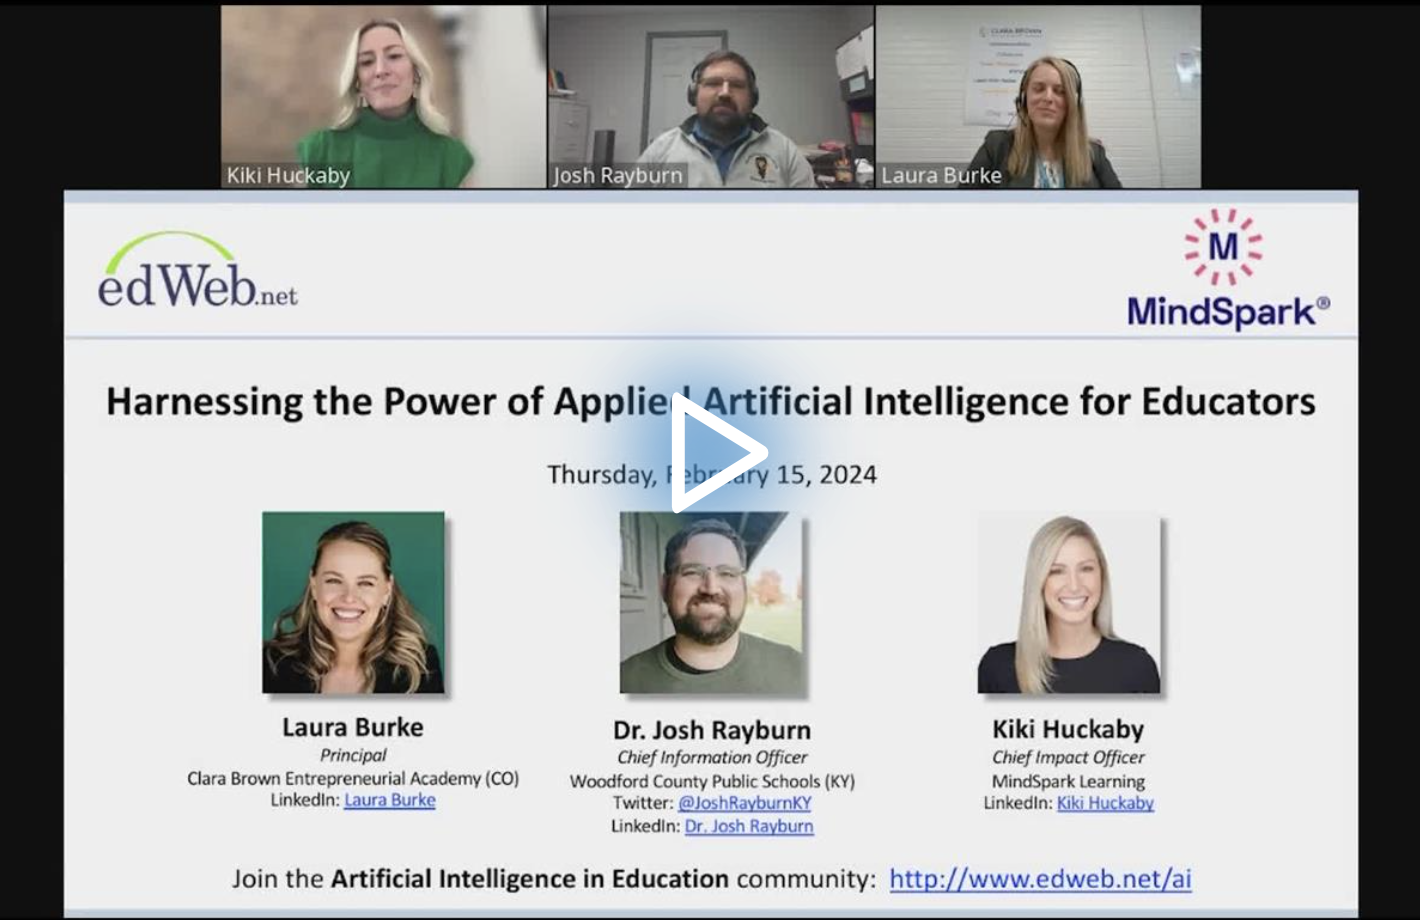 How will Artificial Intelligence (AI) Power New Learning in Education?